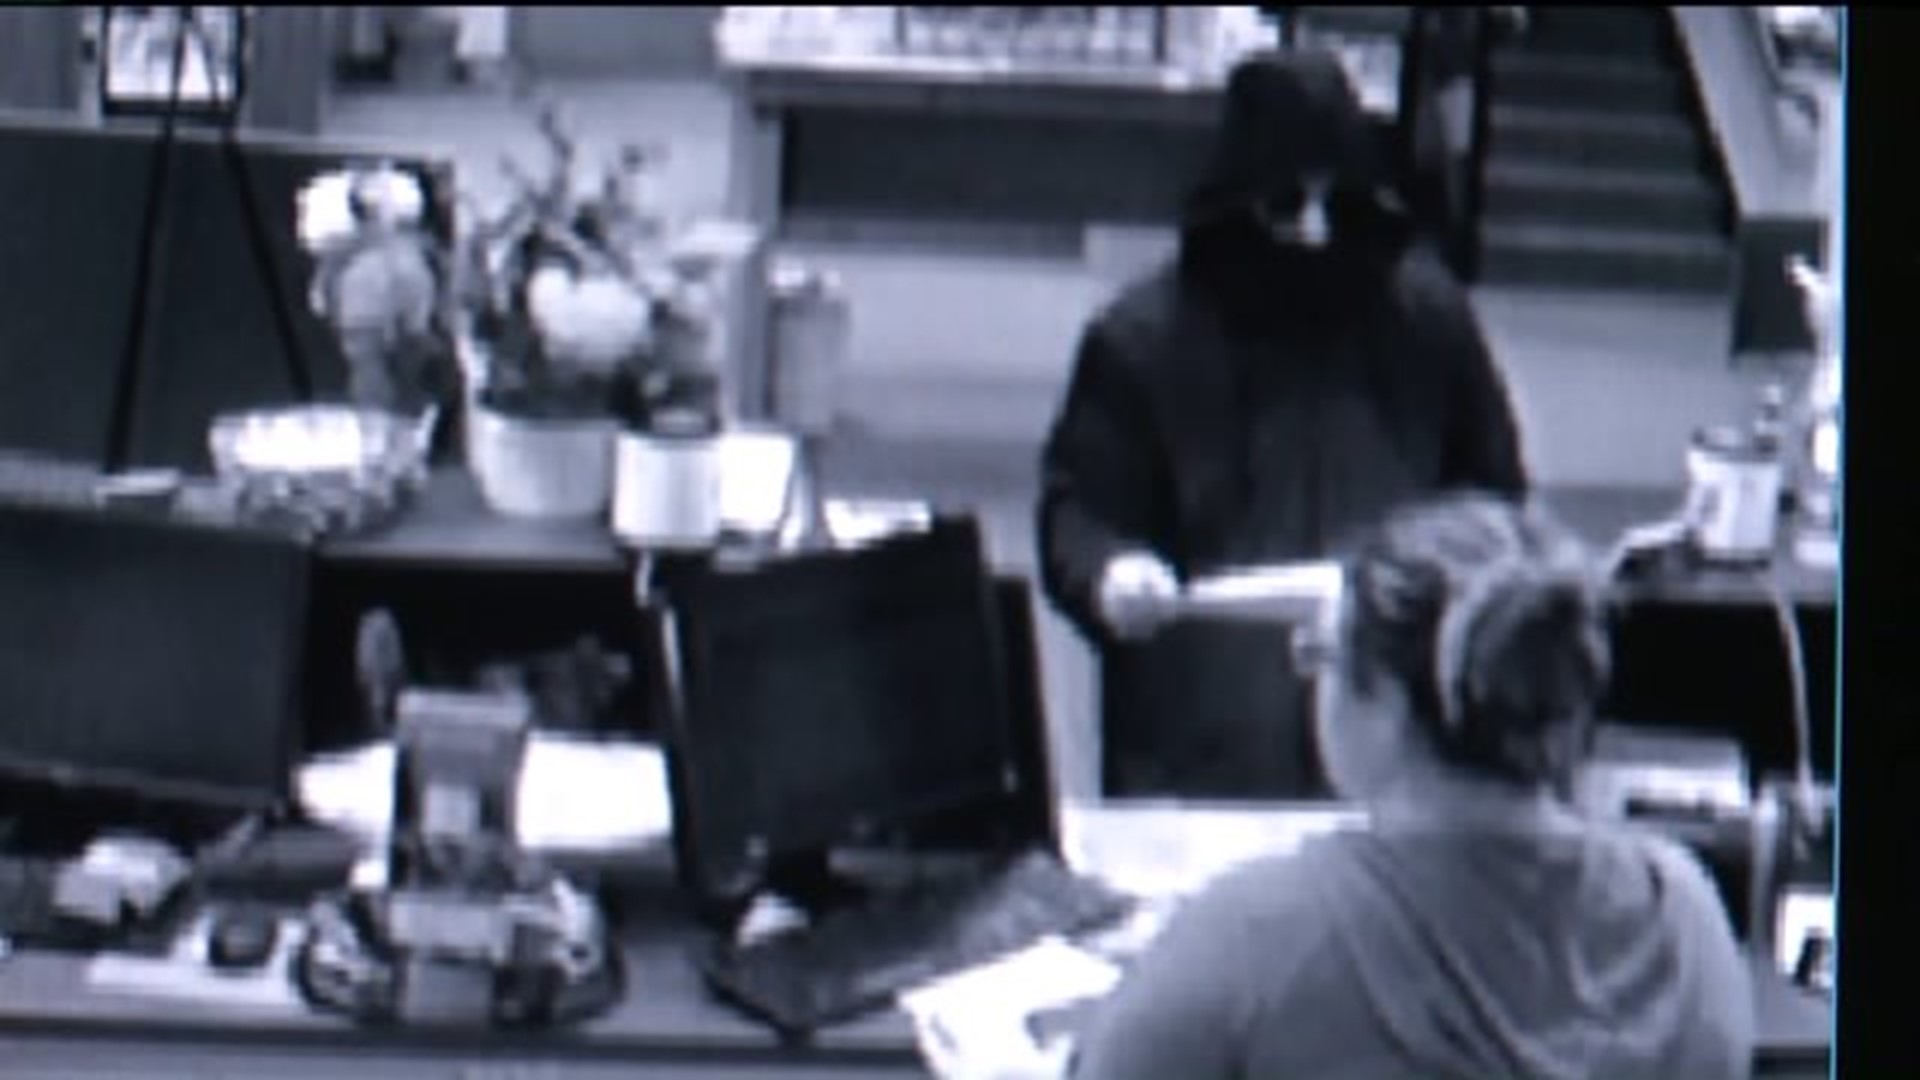 Police Release Surveillance Video of Kingston Bank Robbery